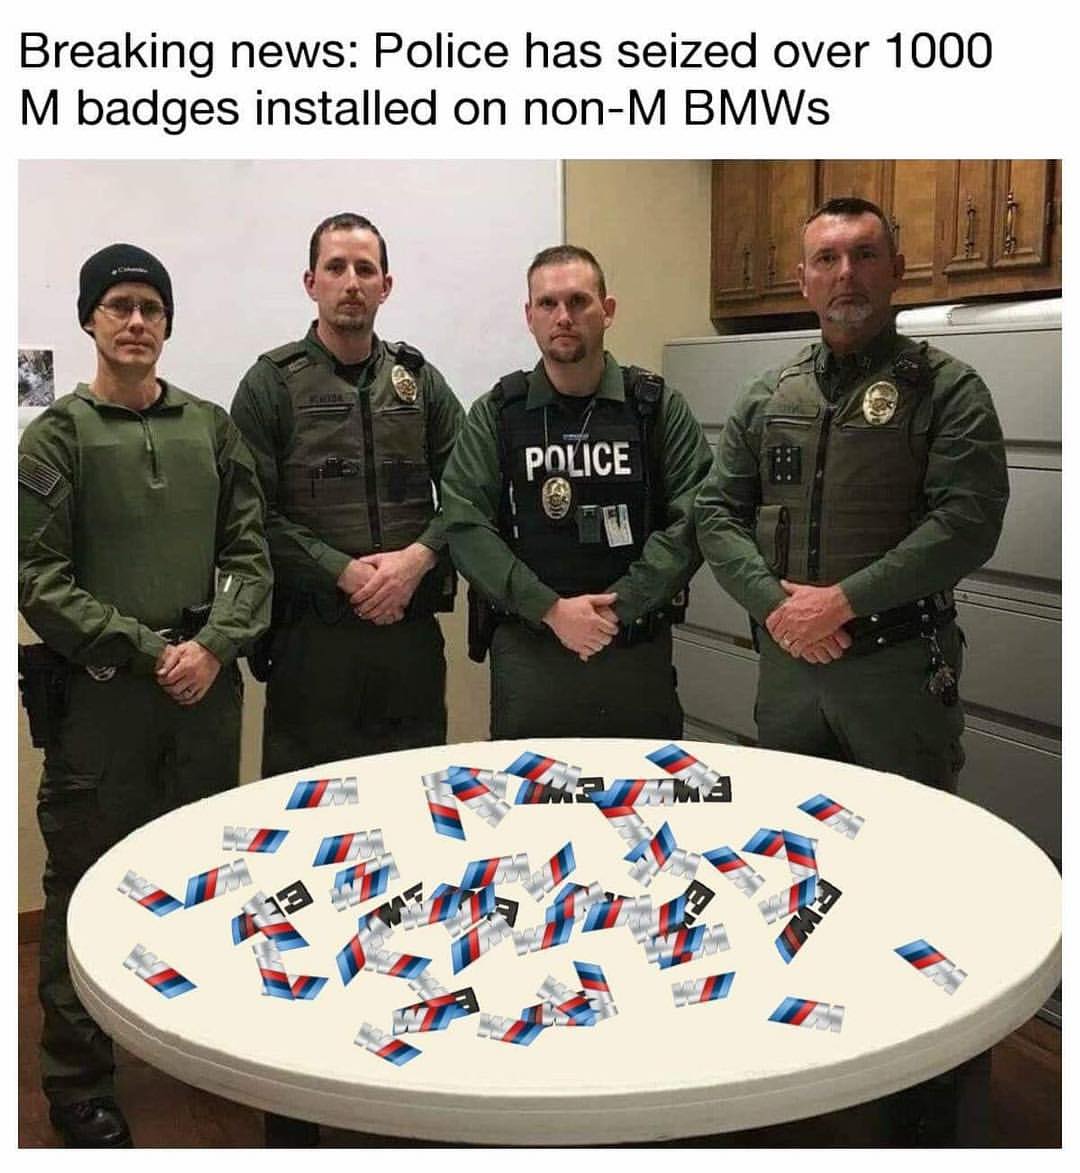 Breaking news: Police has seized over 1000 M badges installed on non-M BMWs.